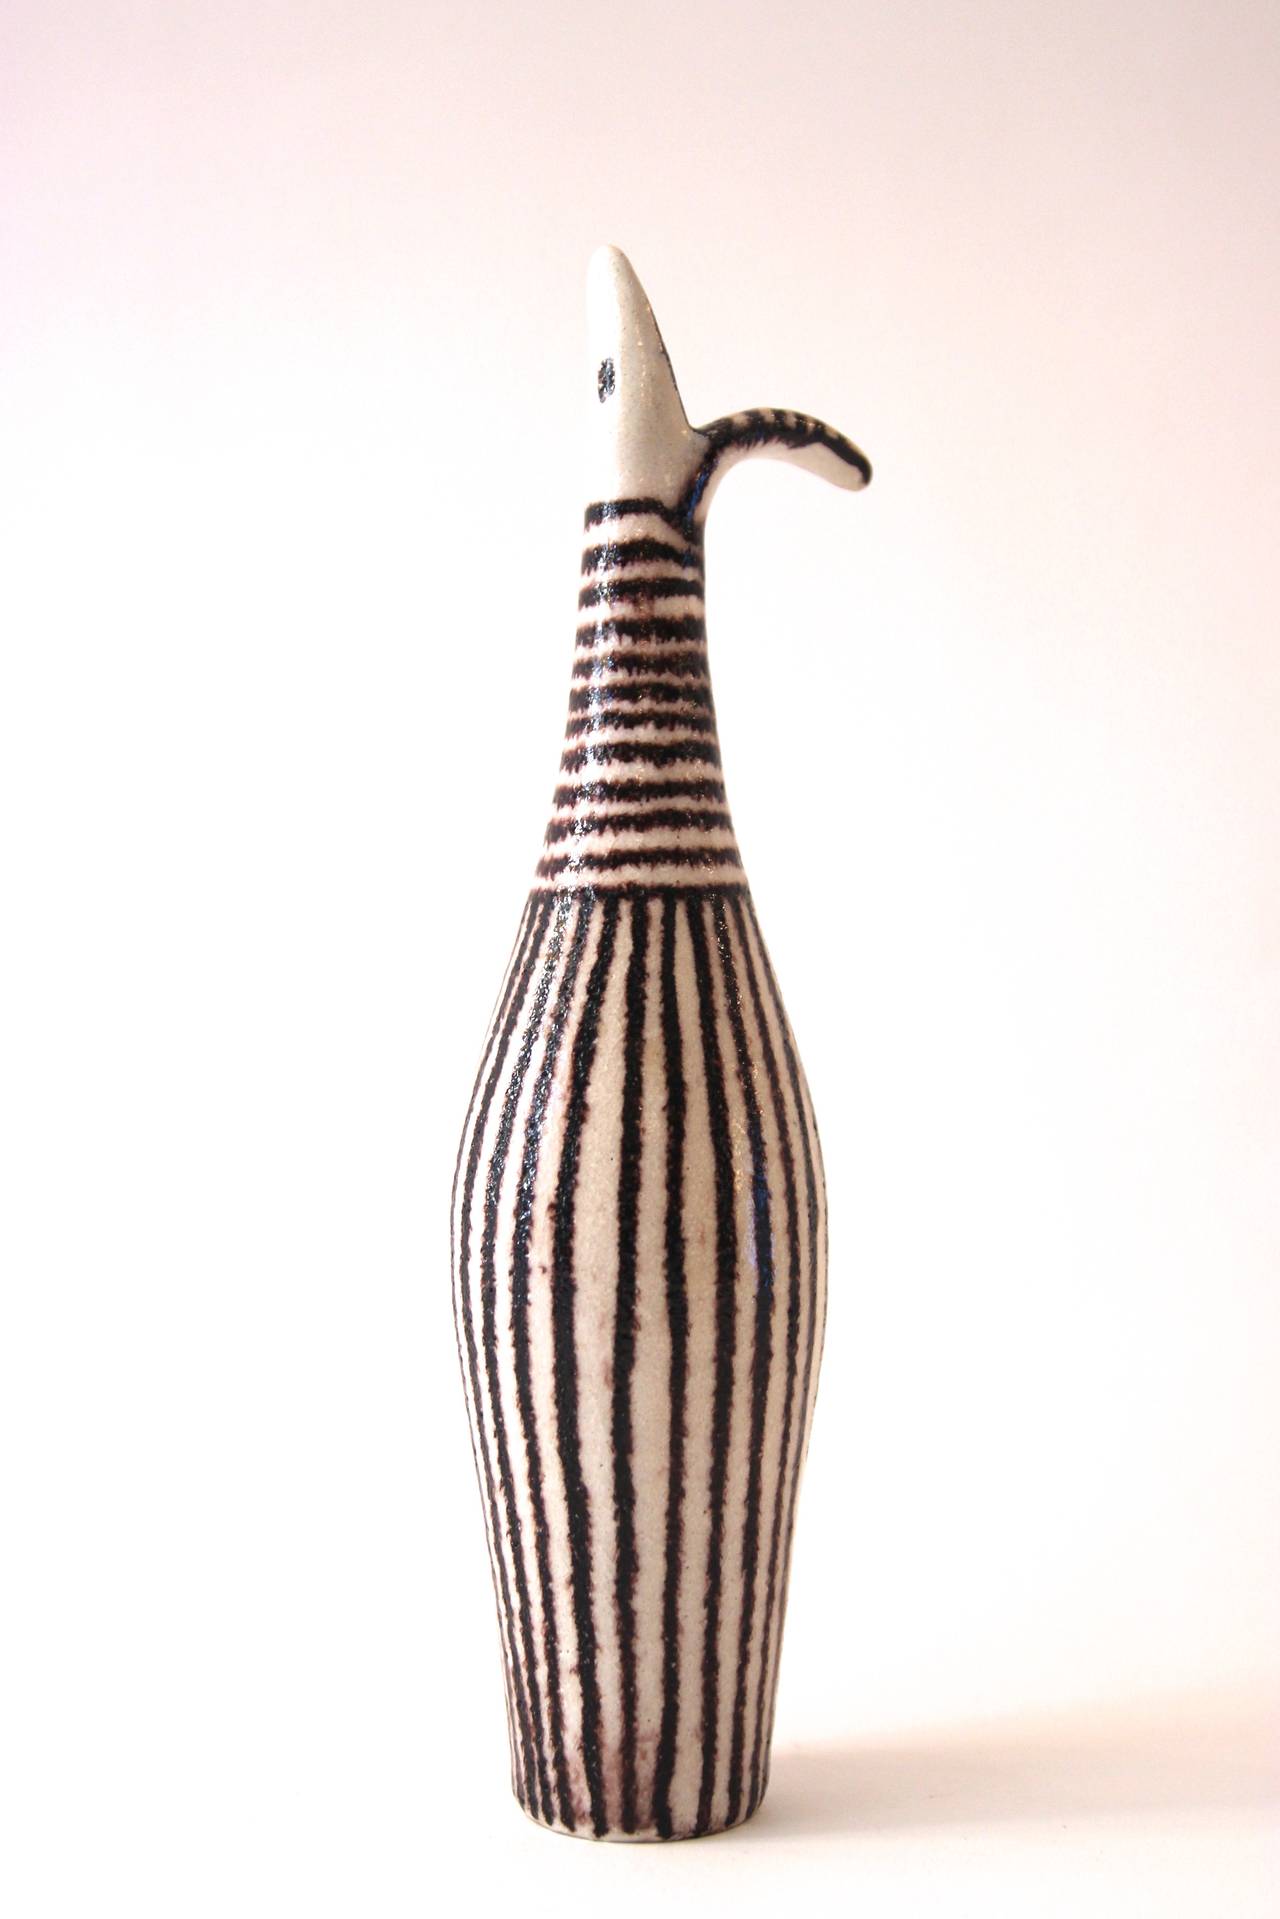 Guido Gambone (1909-1969), Bottle, 
Glazed earthenware,
black and white stripes decor,
Signed and stamped: Gambone under the base, 
Italy, 1960.

Measures: Height 24 cm, diameter 4 cm.

Guido Gambone (1909 – 1969) is one of the most important and